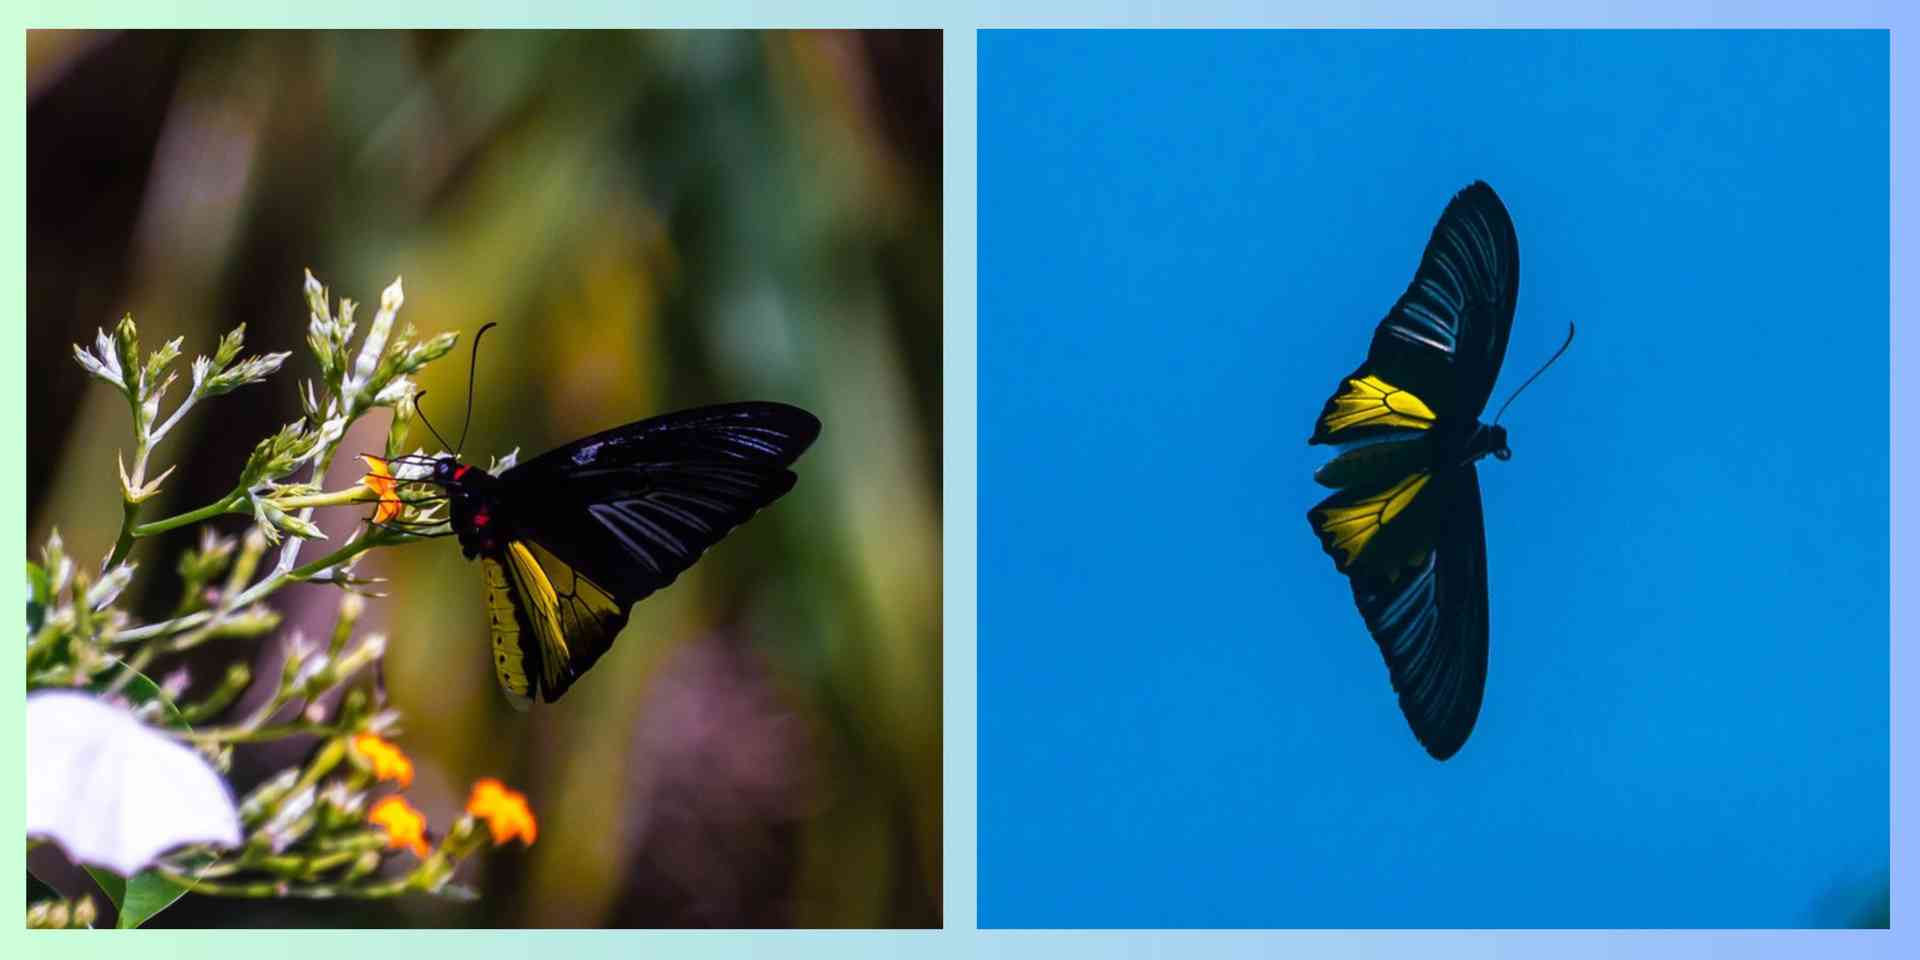 LOOK: Rare Golden Birdwing butterfly spotted in Masungi Georeserve